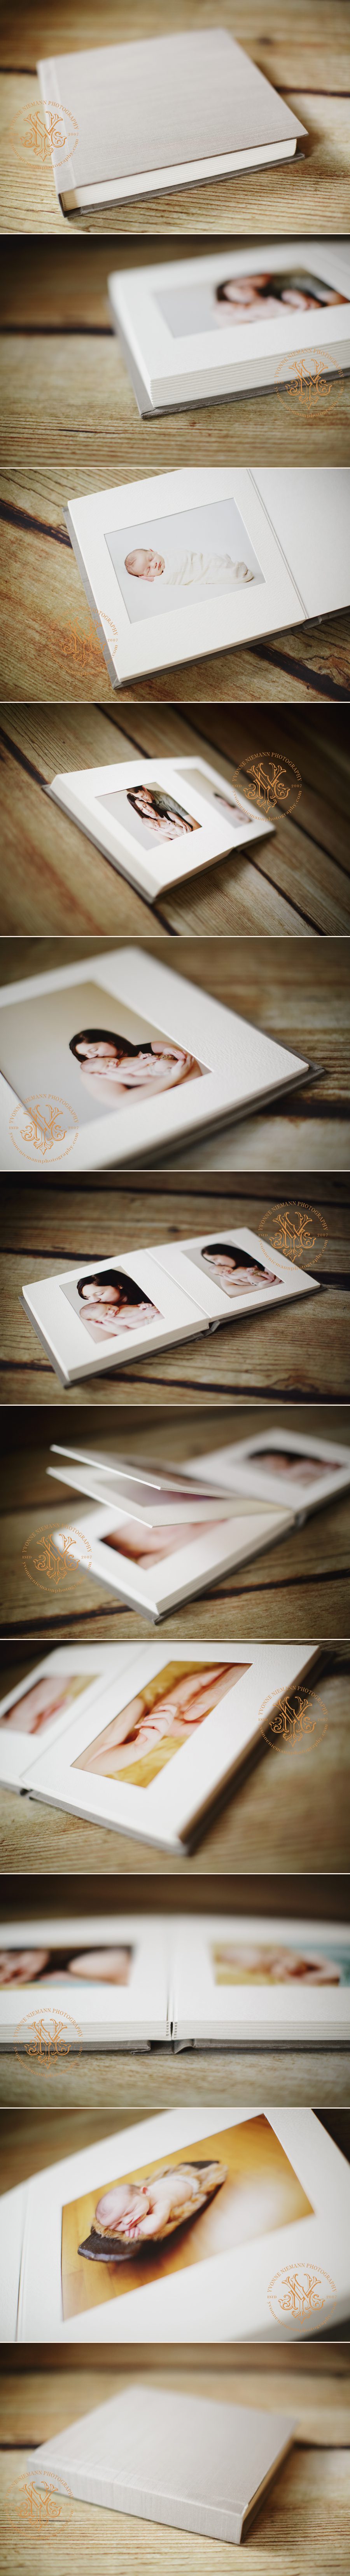 Matted Luxe Album offered by St. Louis Newborn Photographer Yvonne Niemann Photography